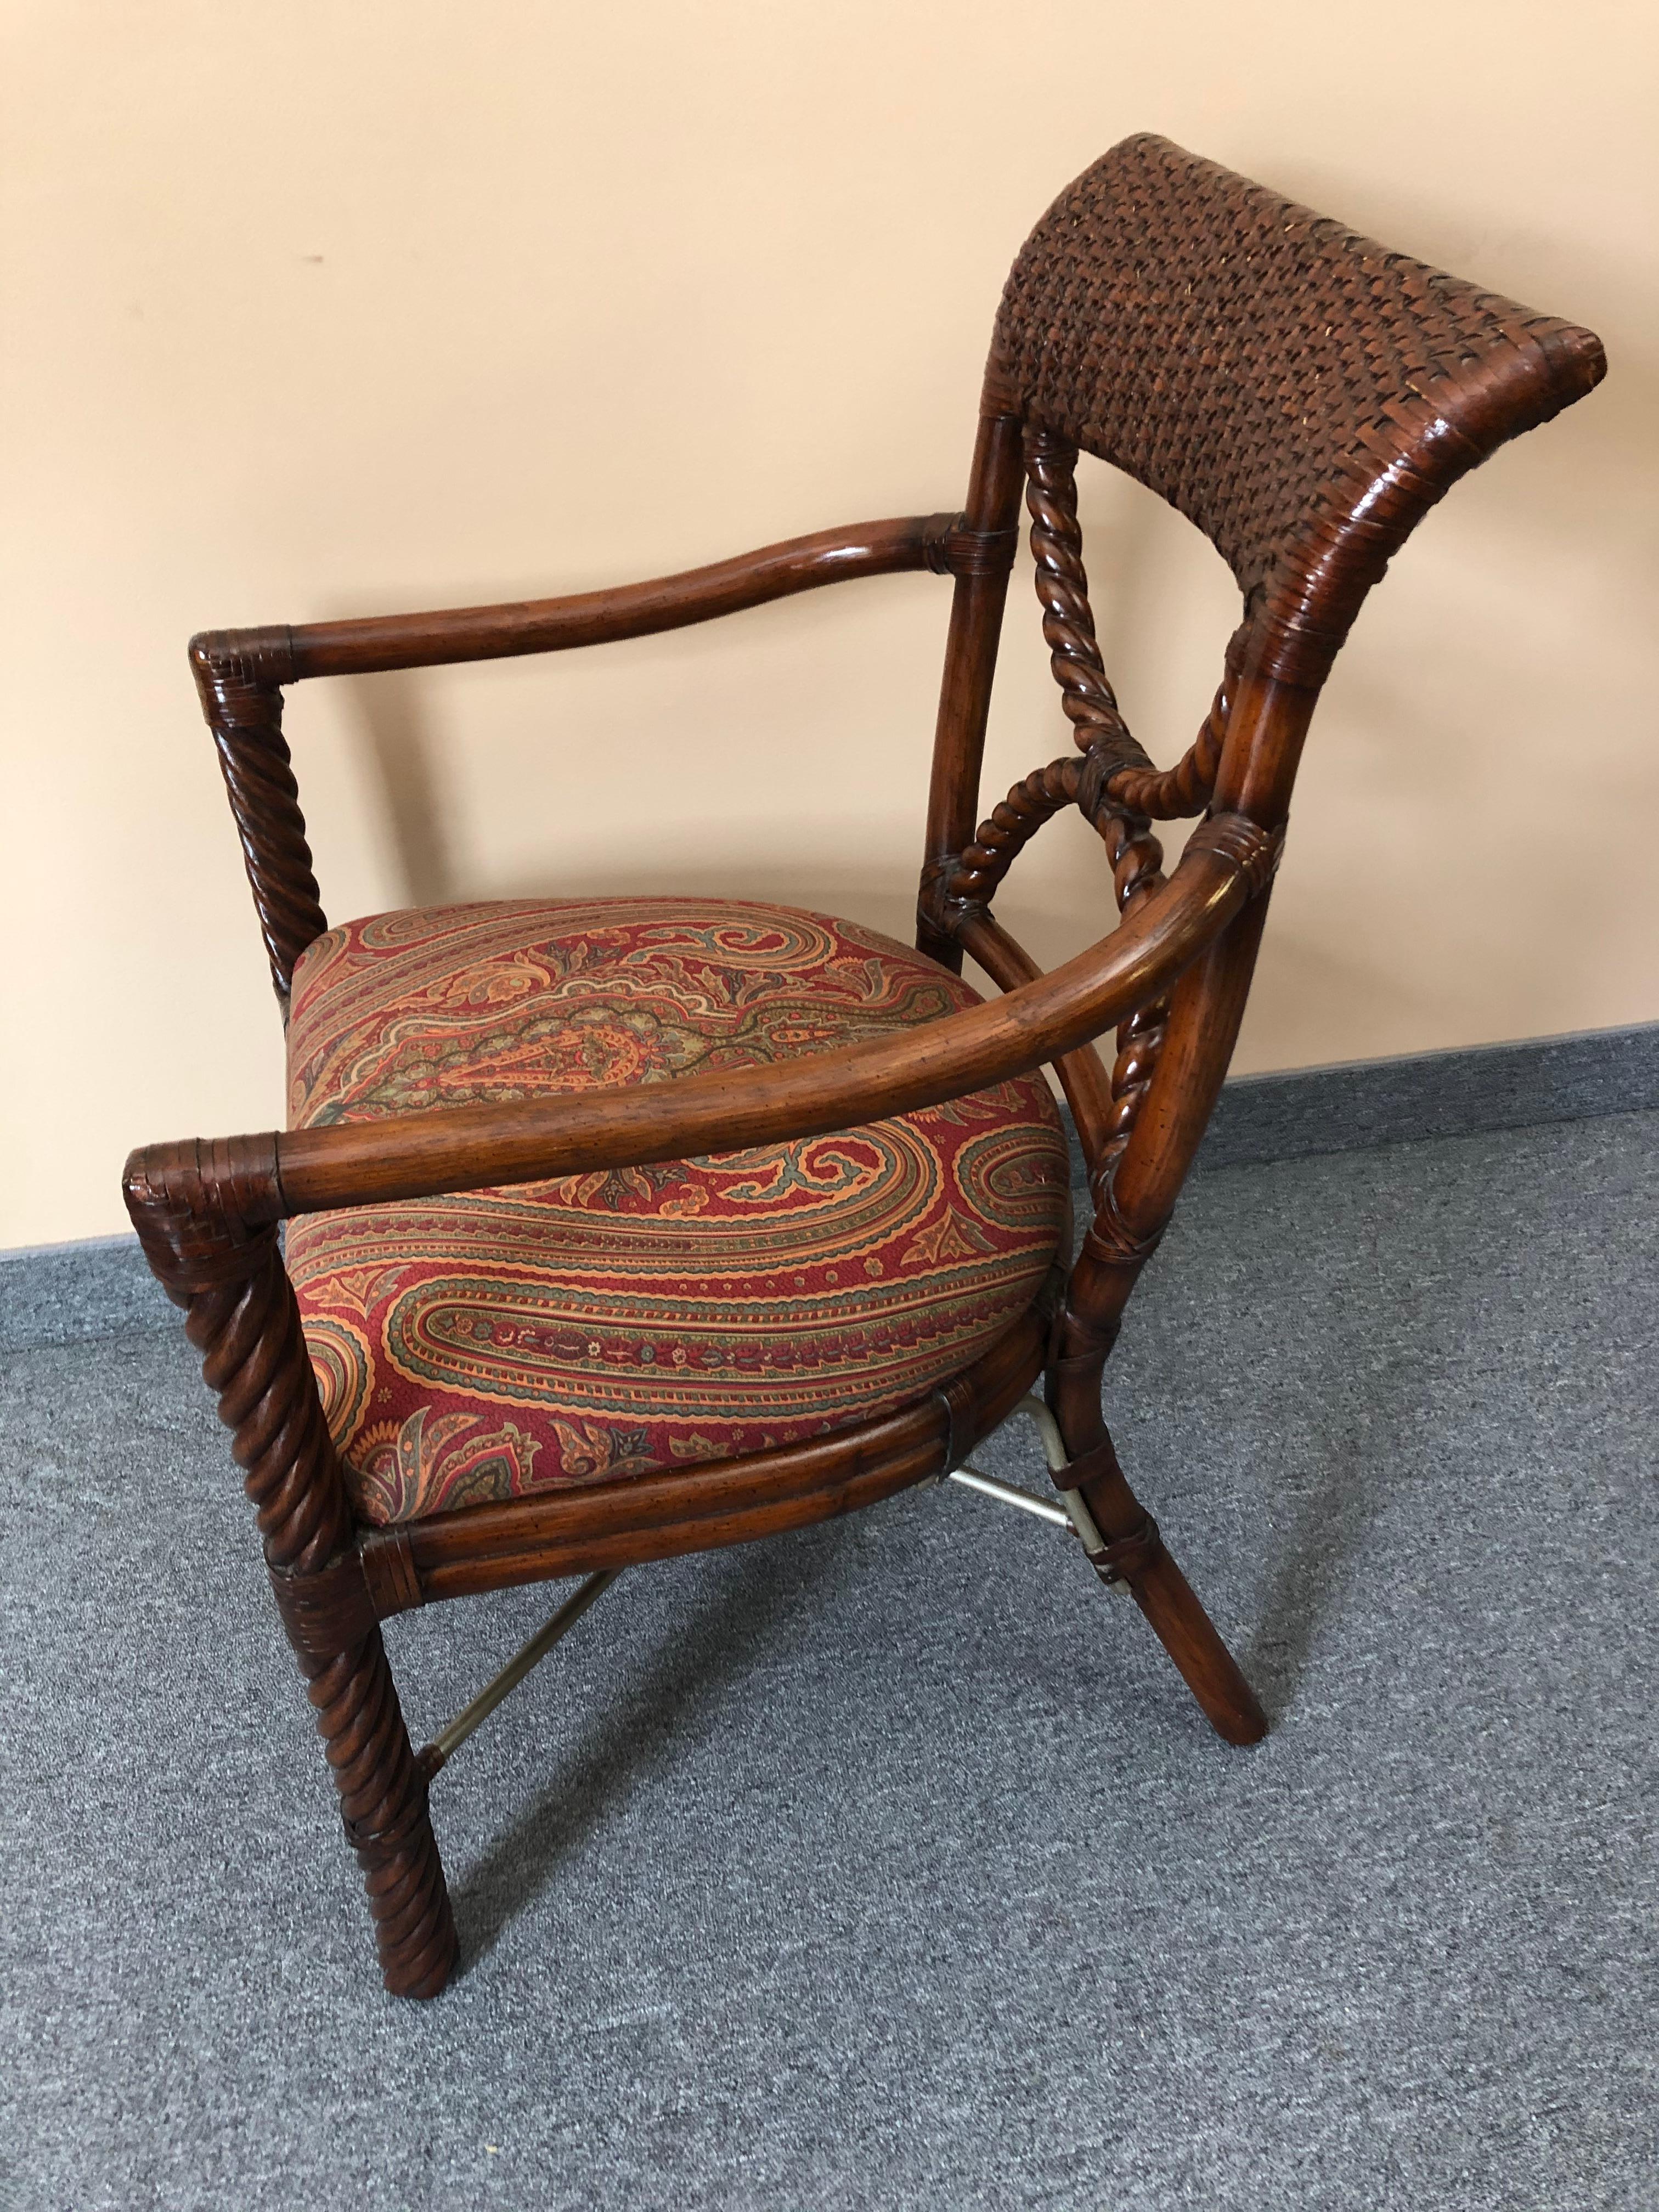 Stylish Wood and Rattan Armchair with Paisley Upholstery 7